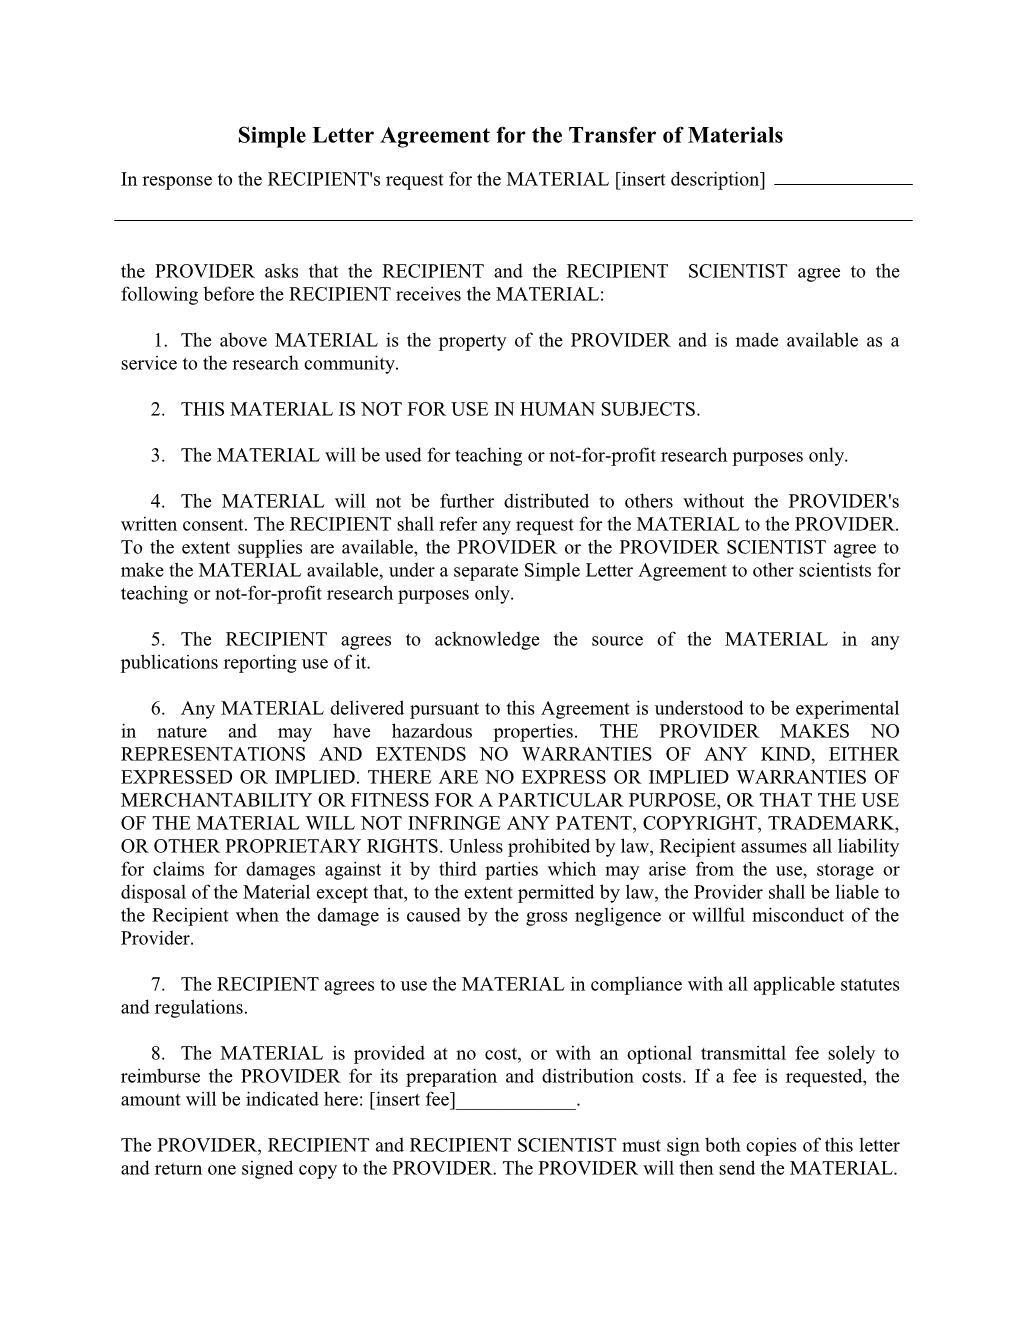 Simple Letter Agreement for Transfer of Non-Proprietary Biological Material